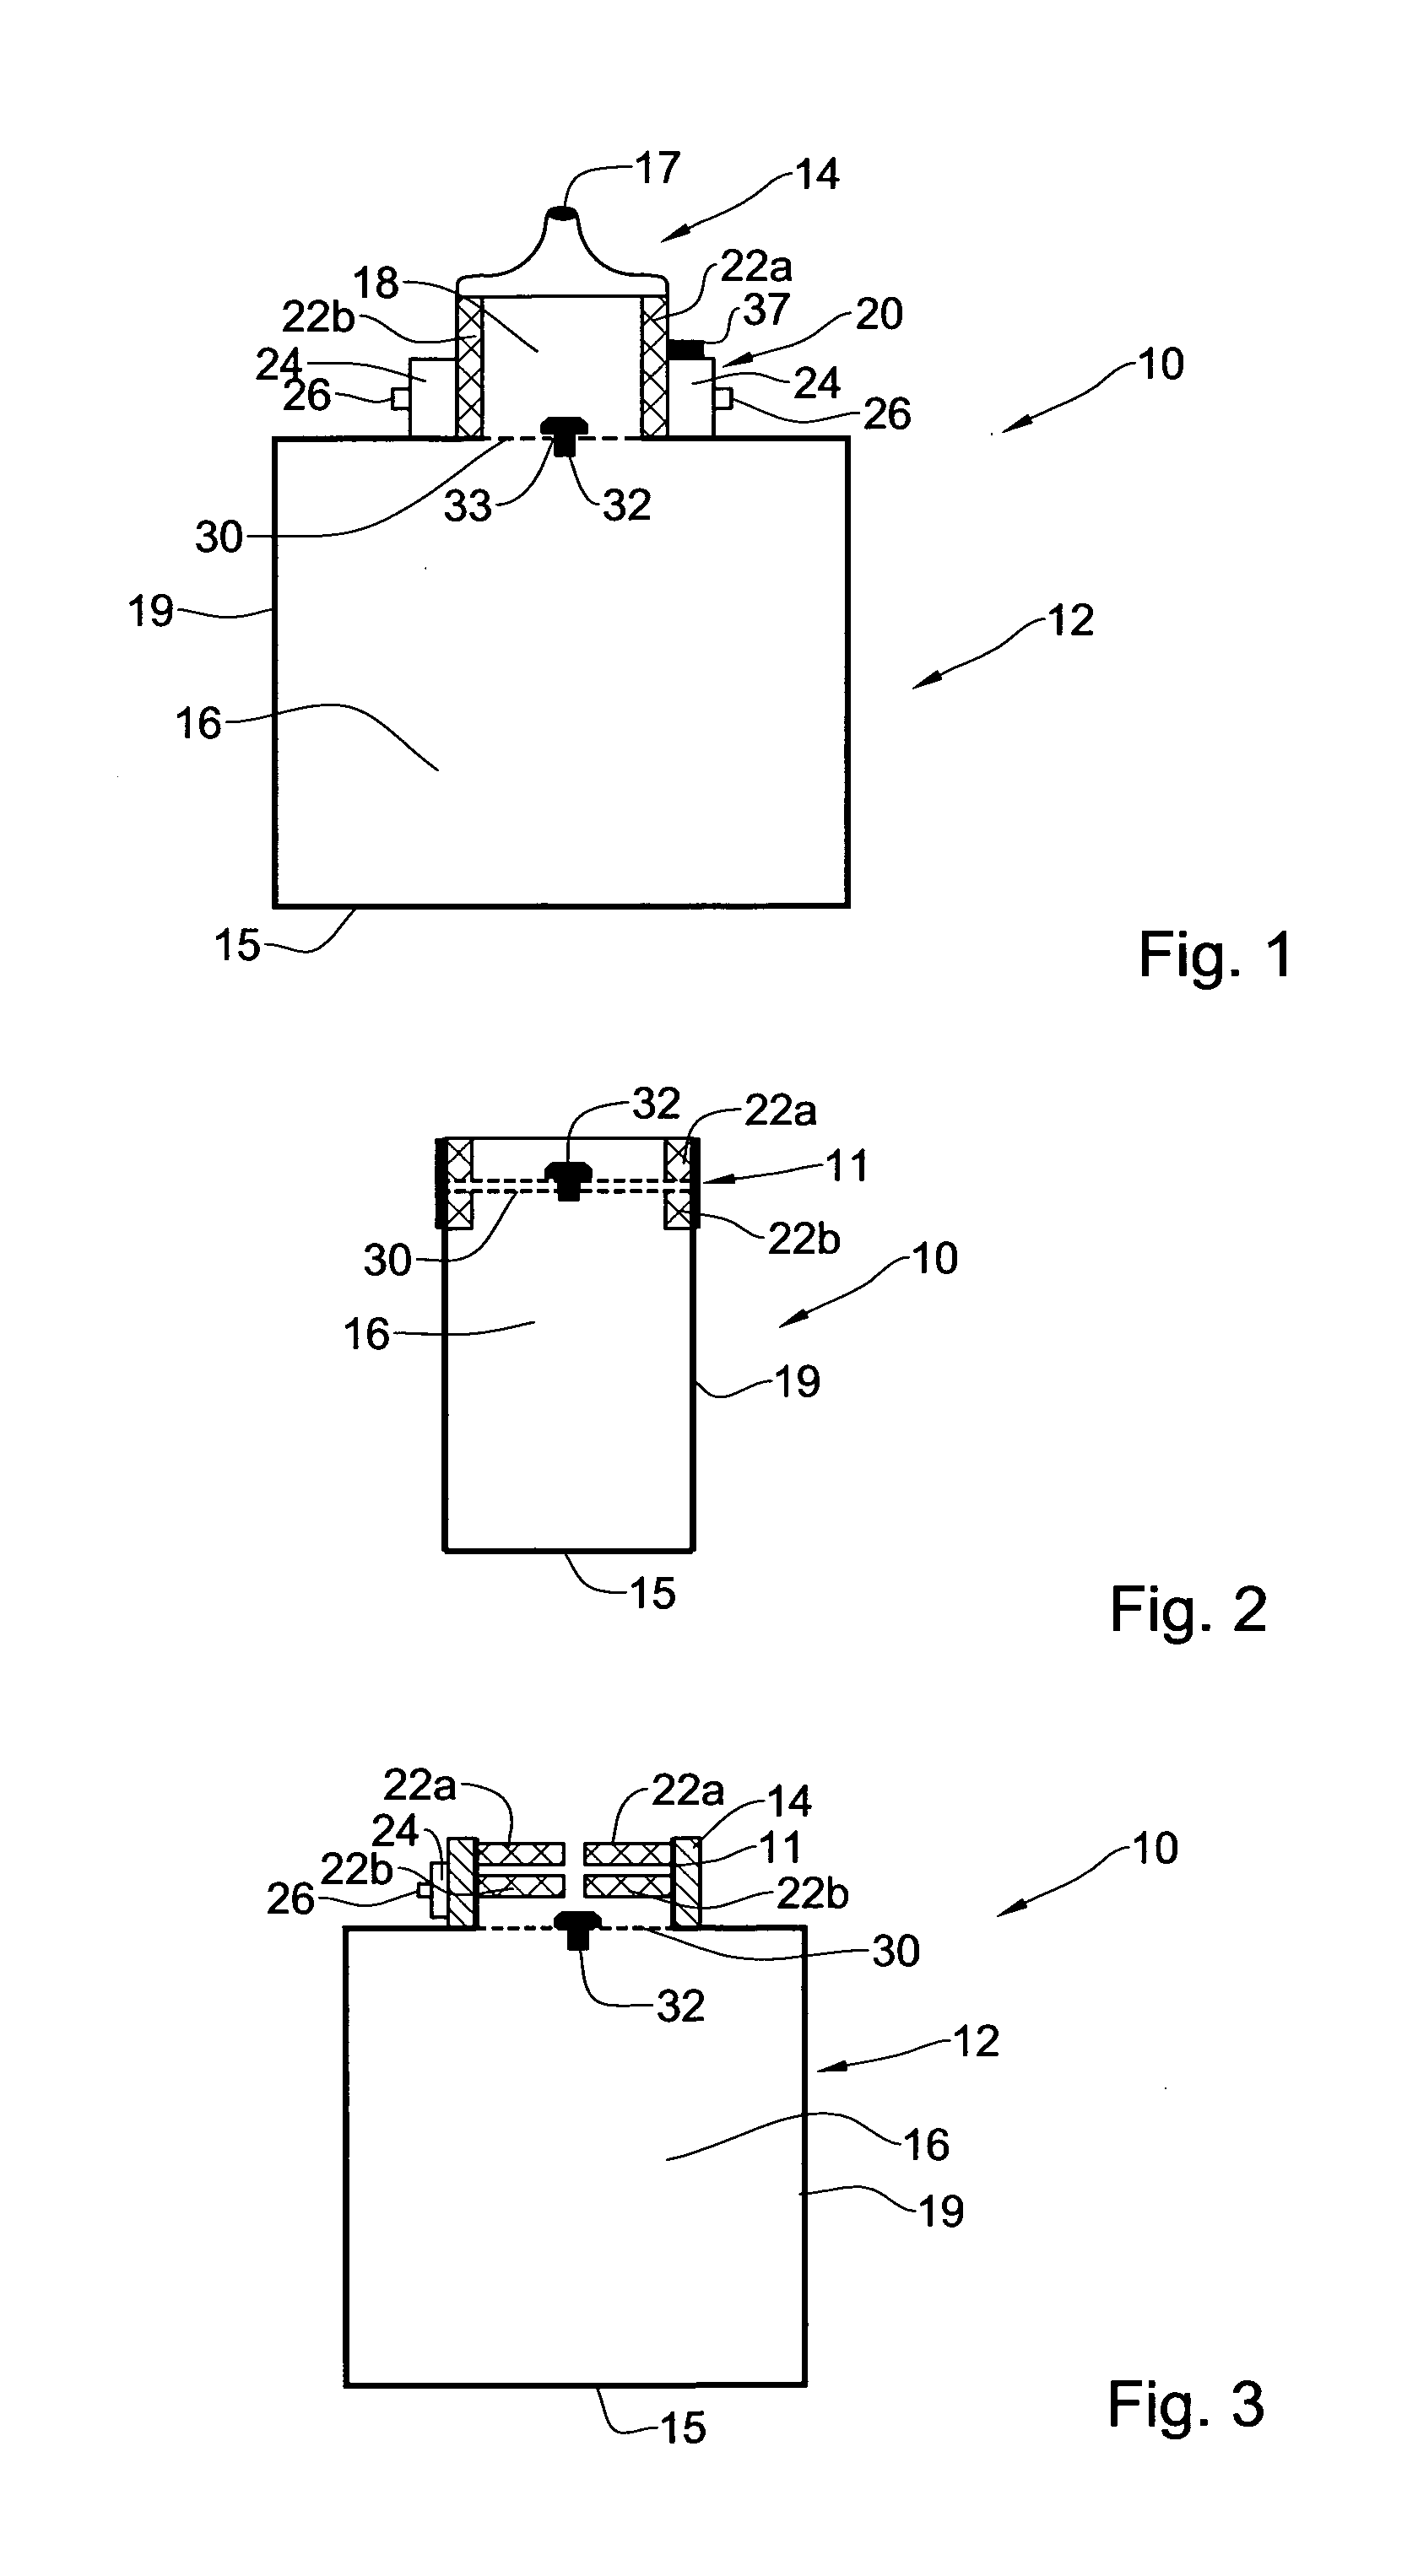 Apparatus, system and method for preventing biological contamination to materials during storage using pulsed electrical energy